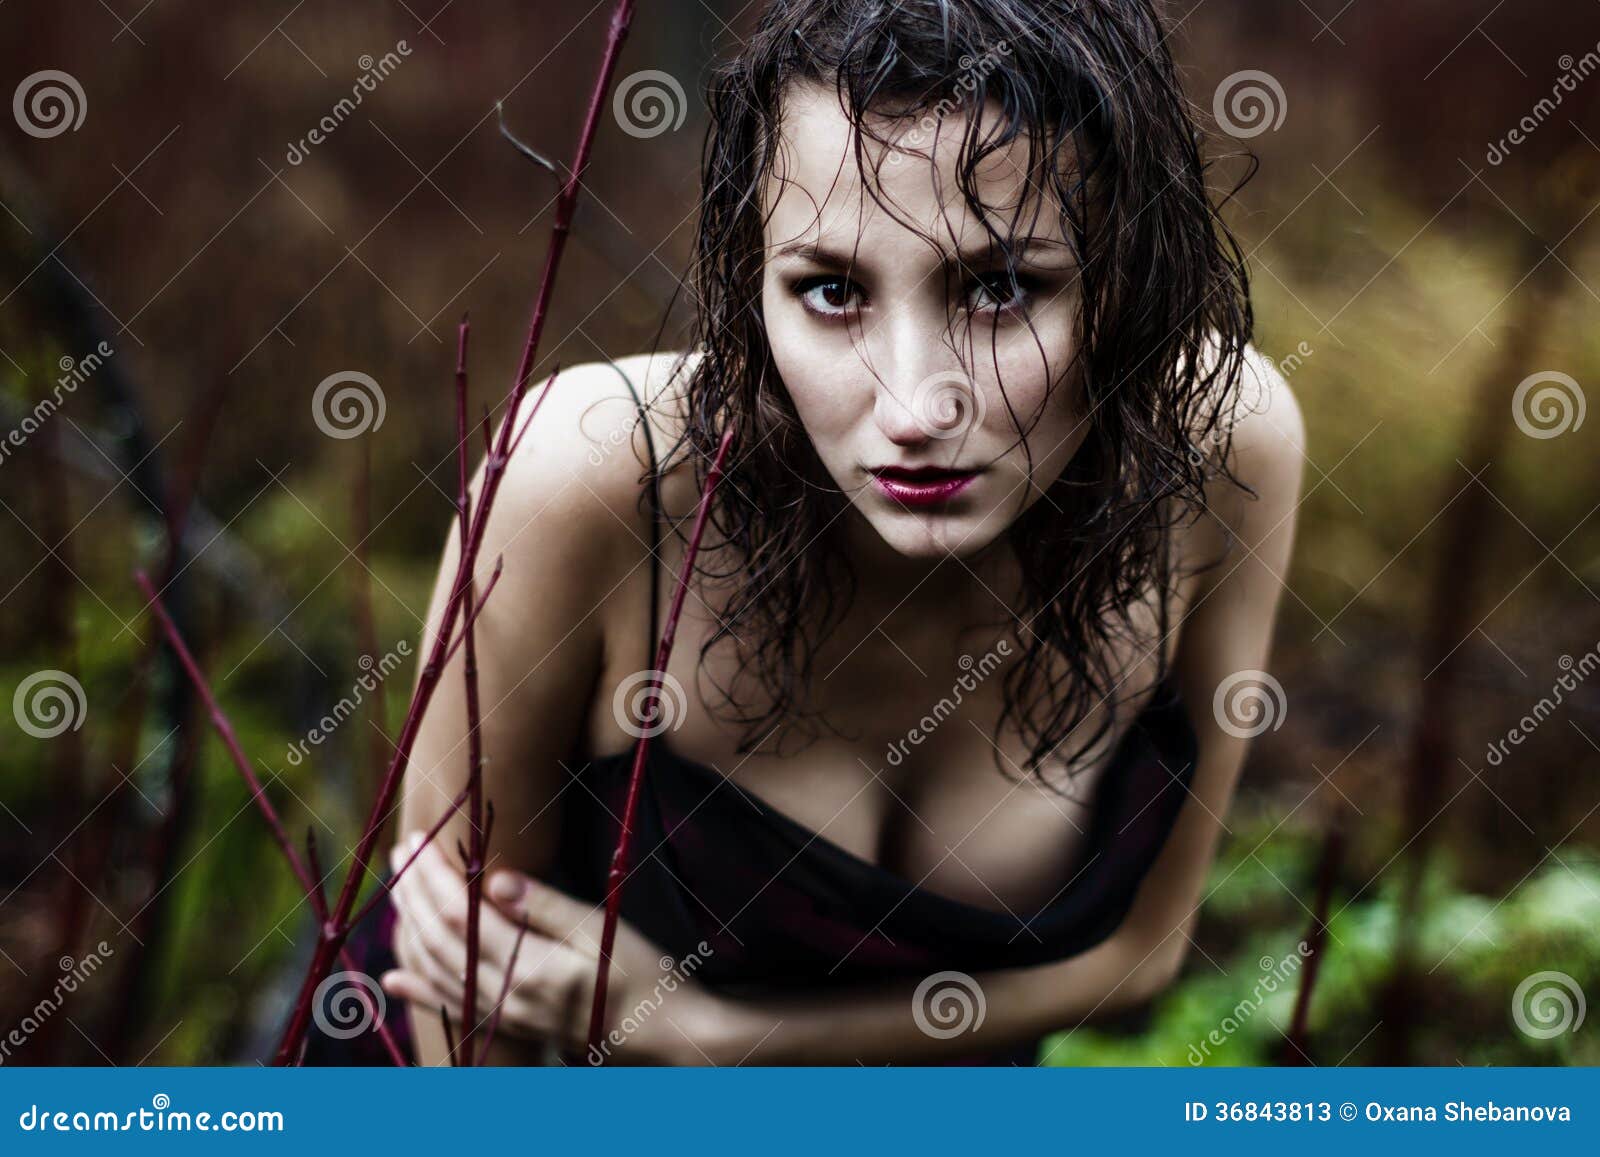 Scared face of woman Stock Photo by ©rainfall 49680905